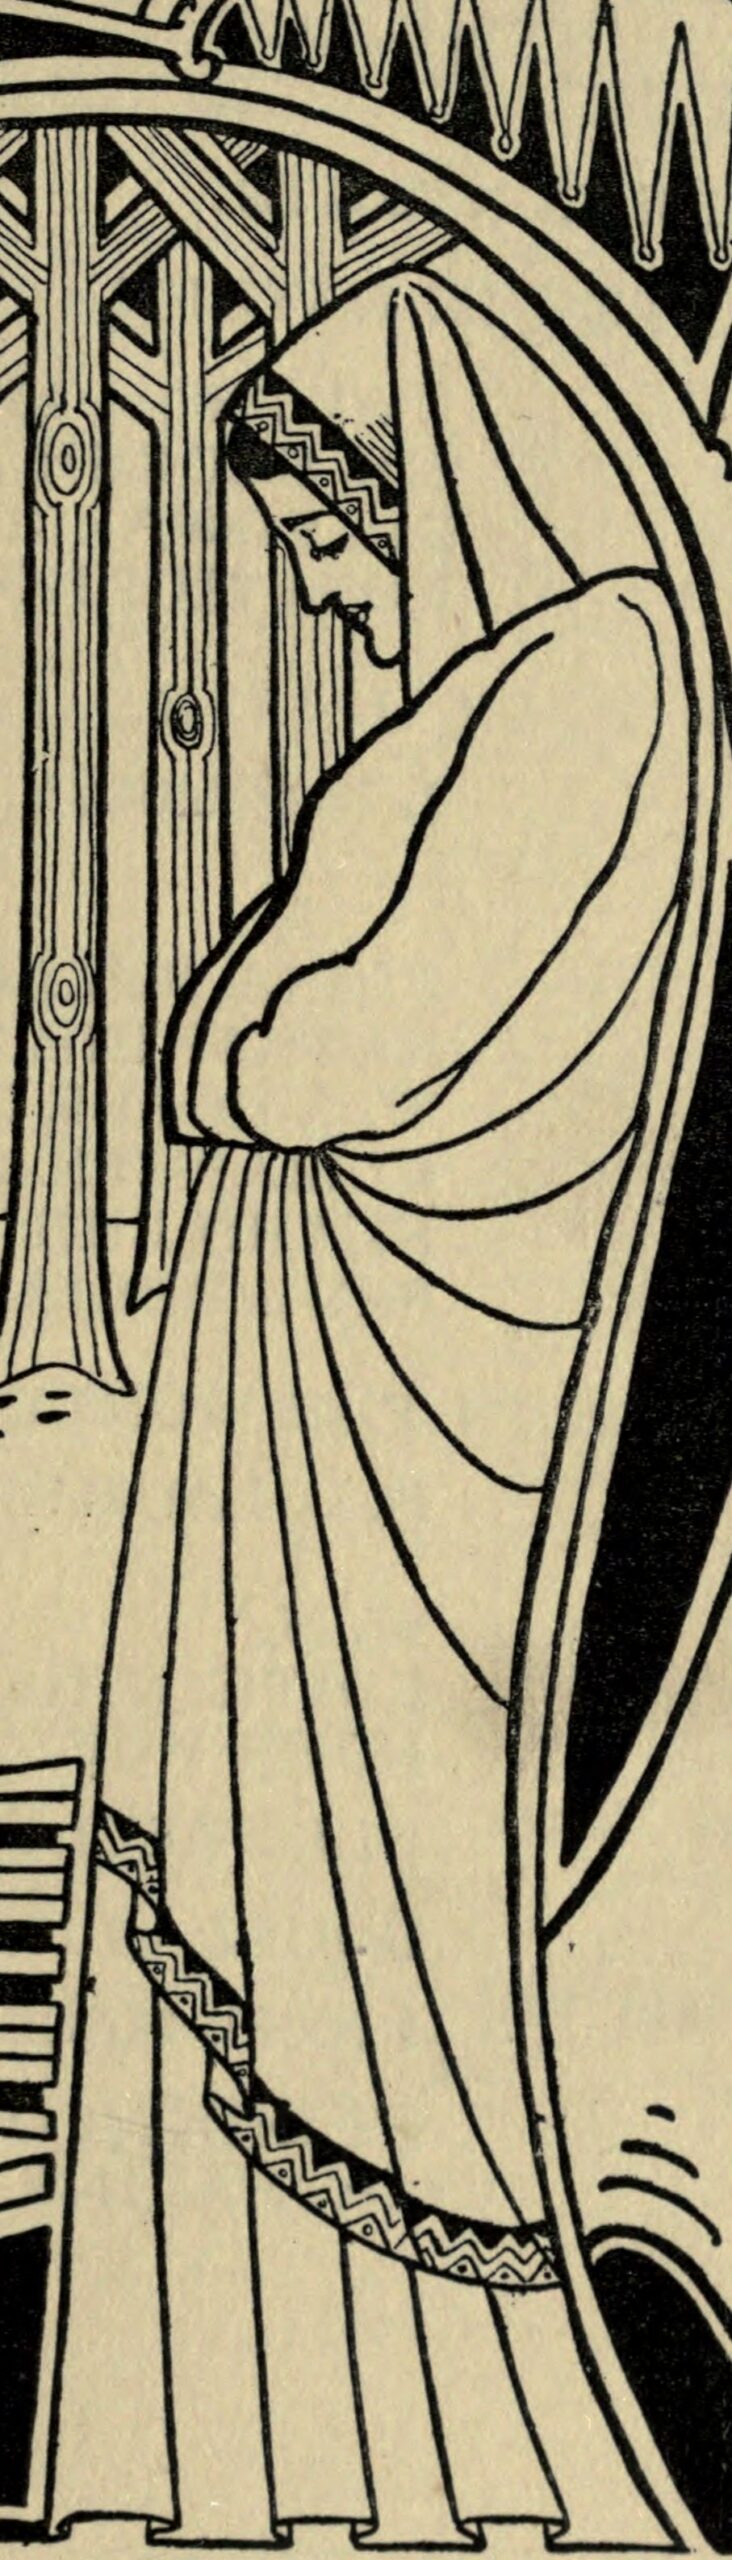 Detail of "Almanac" by Nellie Baxter, The Evergreen, Vol. 4. 1896-97.